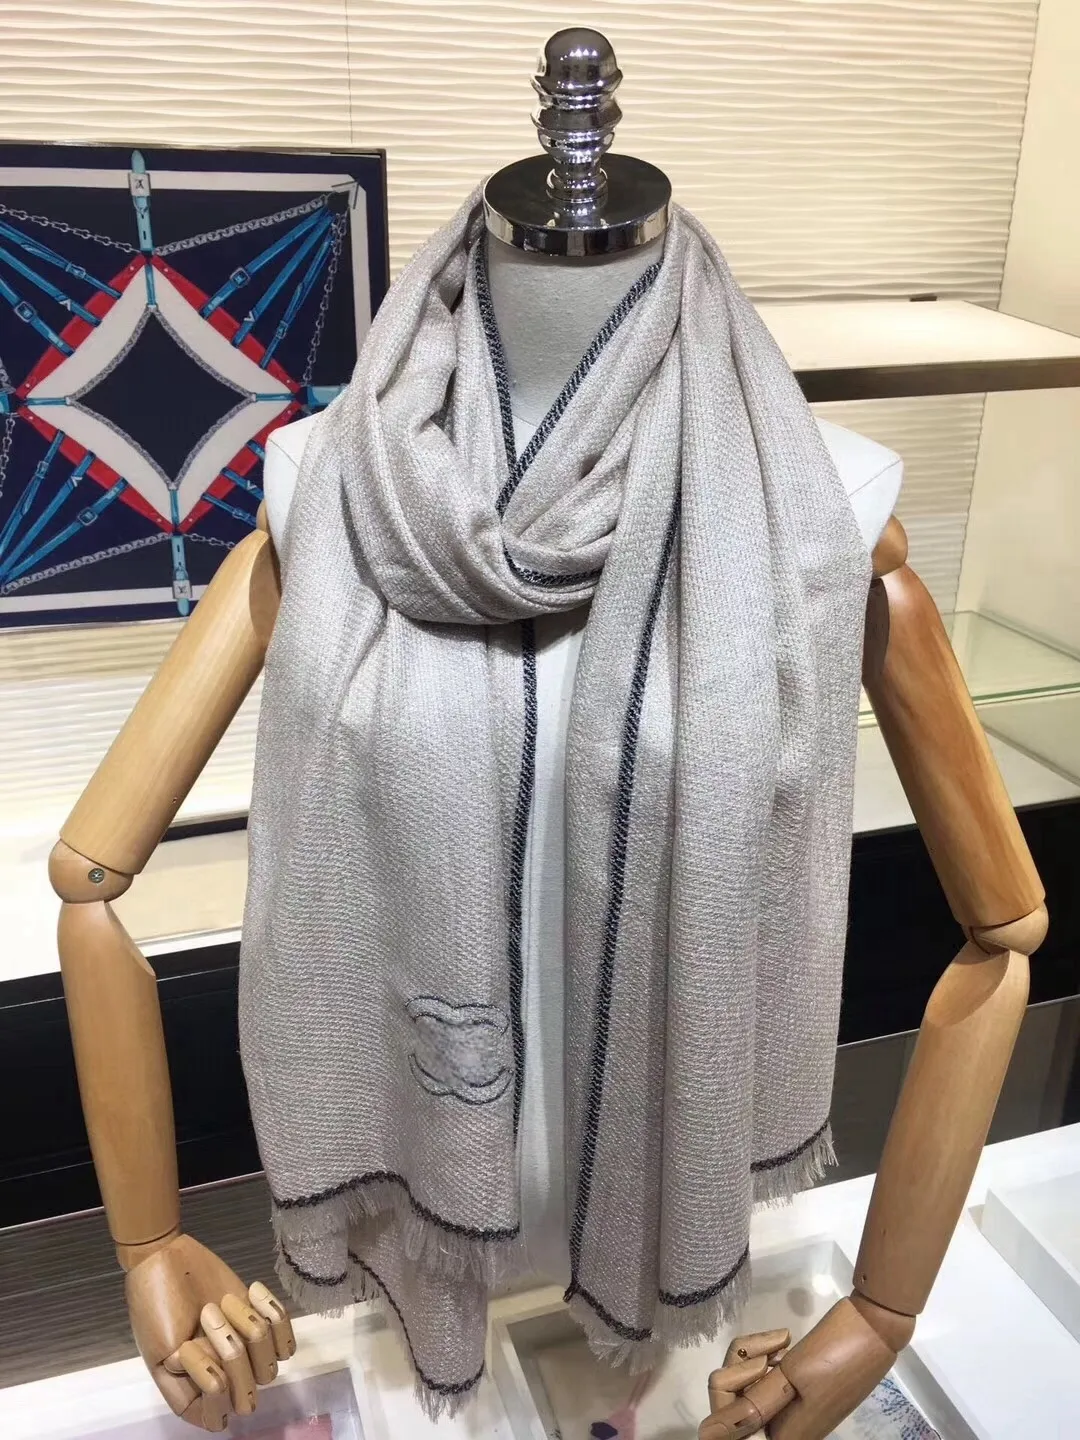 Fashion Brand Designer Double C Embroidery Process Ultra-fine Cashmere Yarn Woven Soft And Delicate Exquisite Craft Simple Retro Style Classic Luxury Scarf Cape.